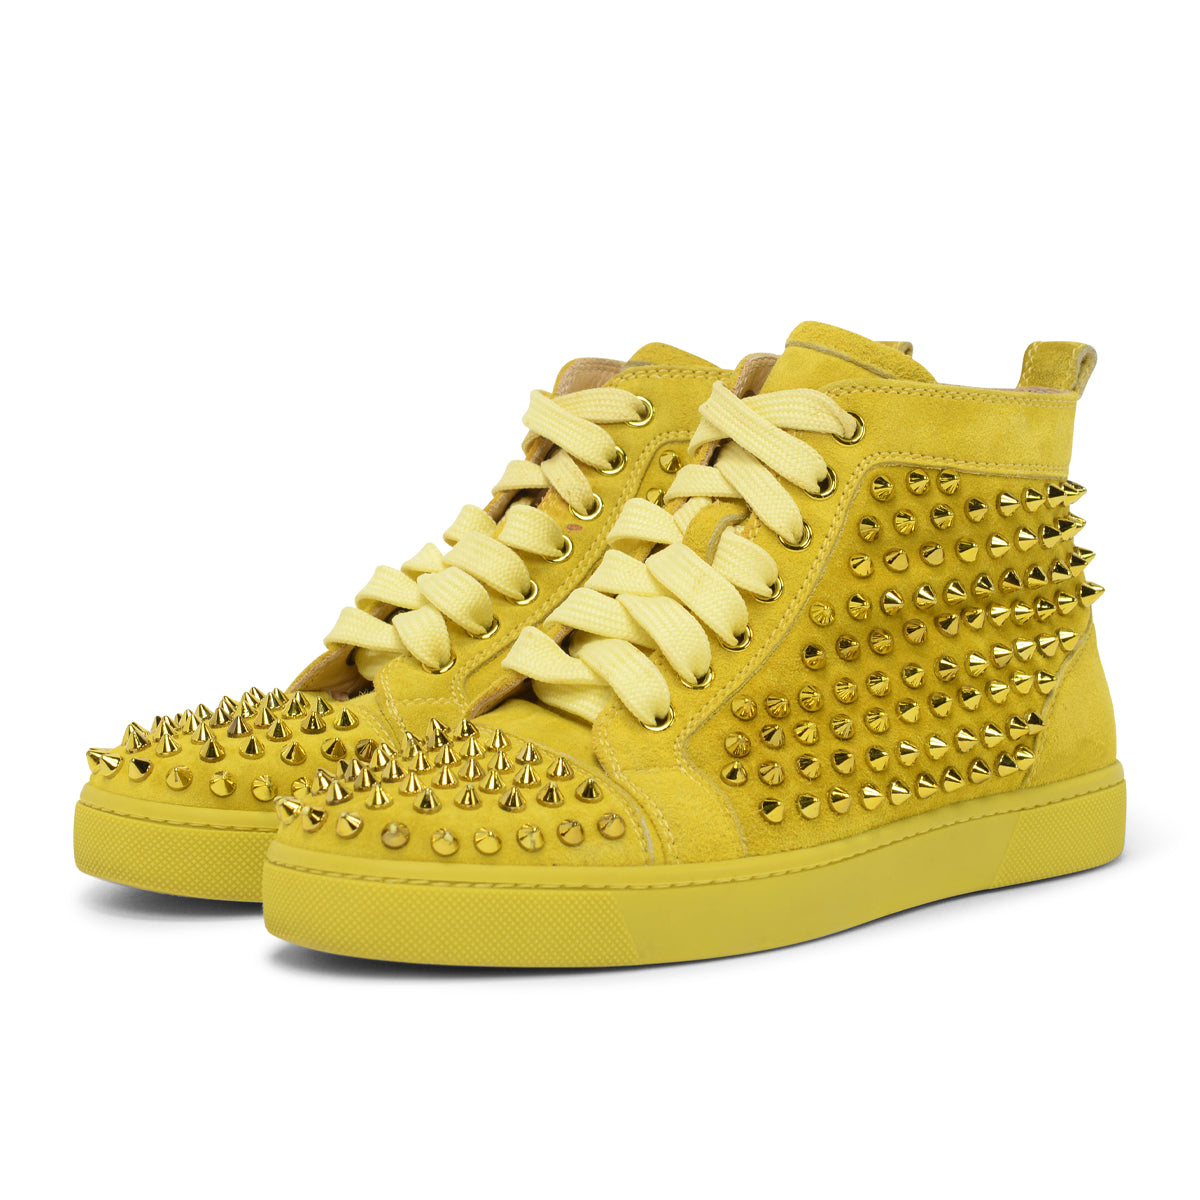 Christian Louboutin Louis Spike Suede High Top Sneaker in Red for Men